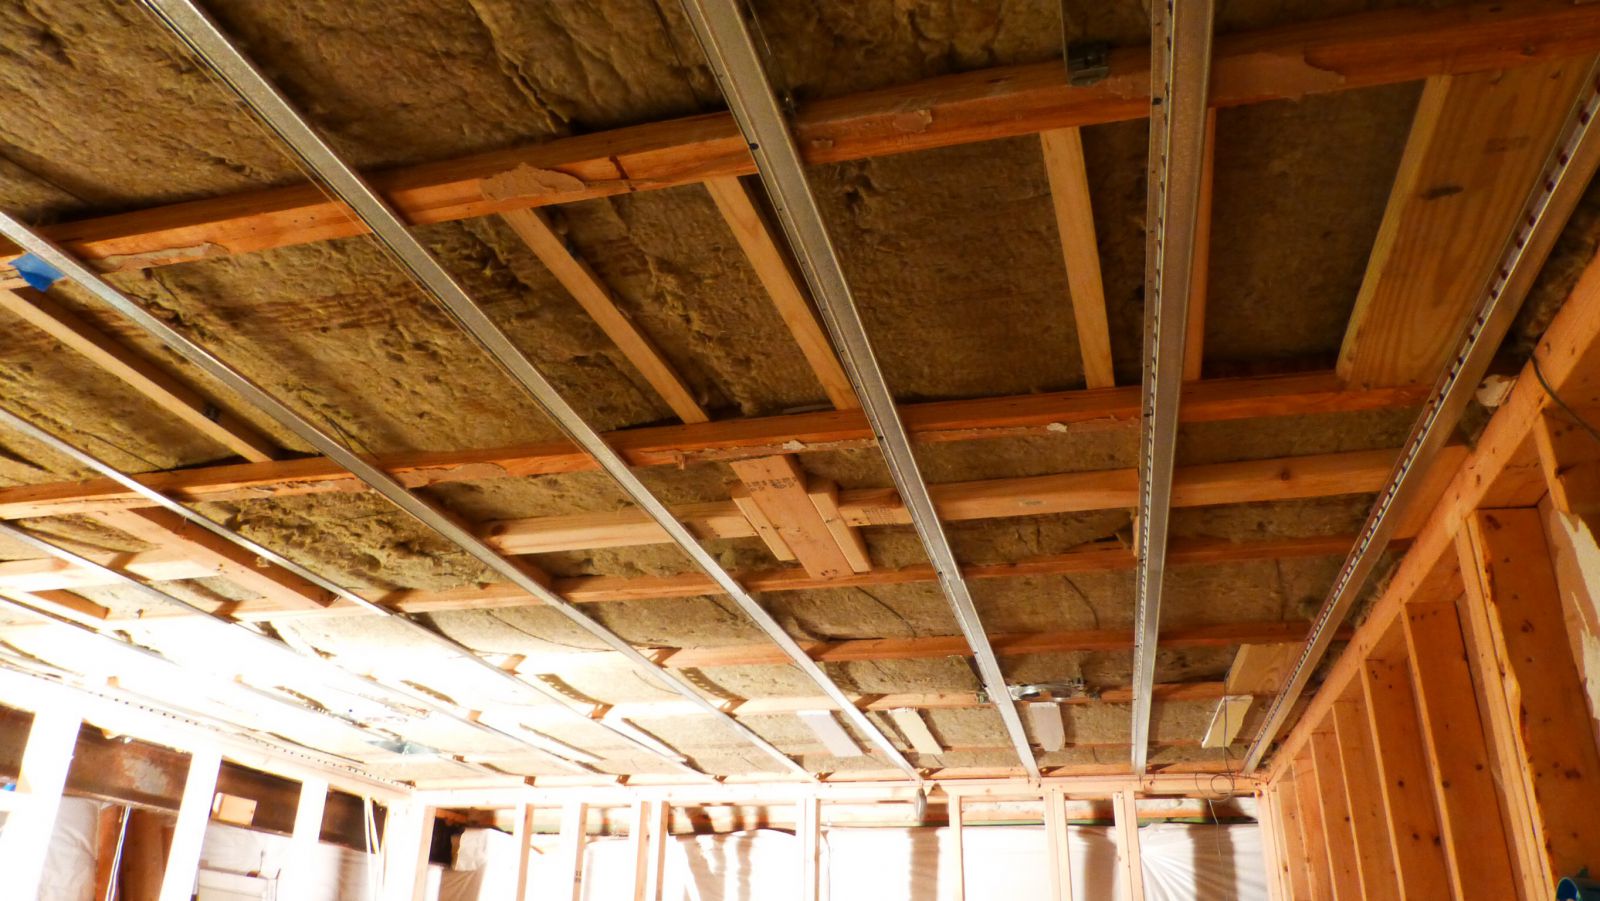 P- Auralex RC8 wall decoupling metal strips (16 inches apart within 24 in wide joists)